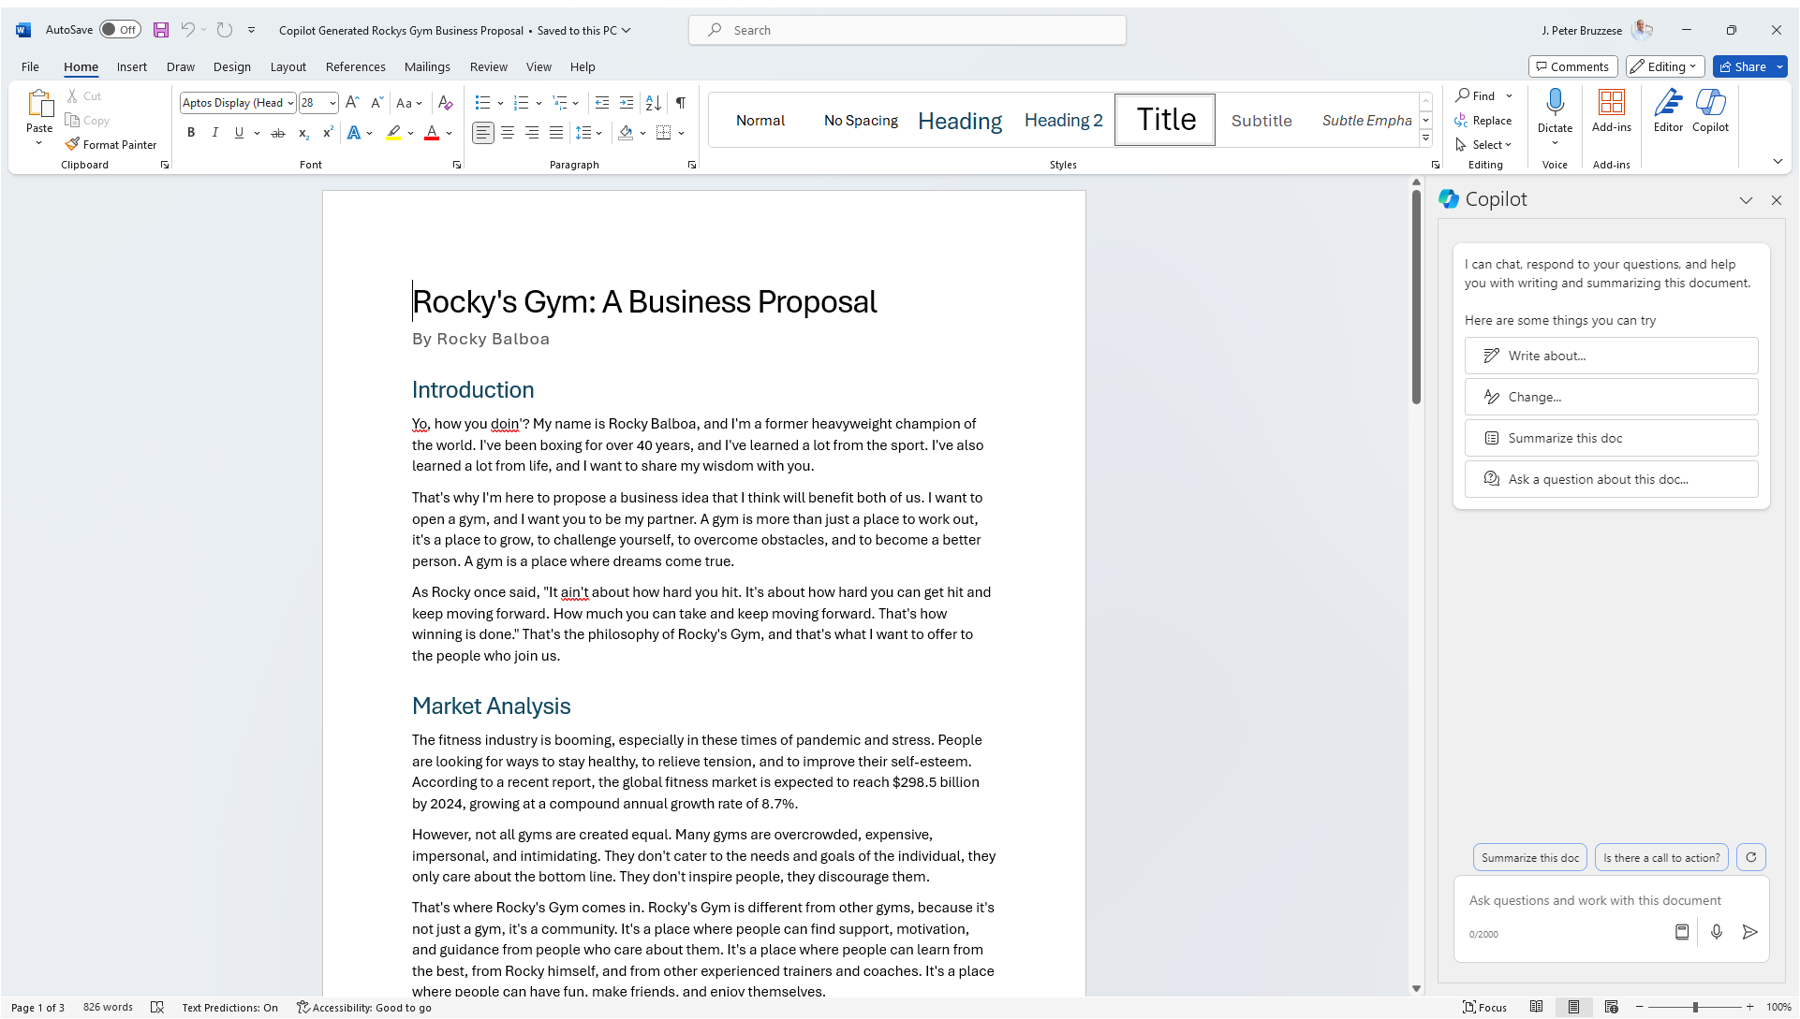 A Word document proposal written as Rocky Balboa (by Copilot).